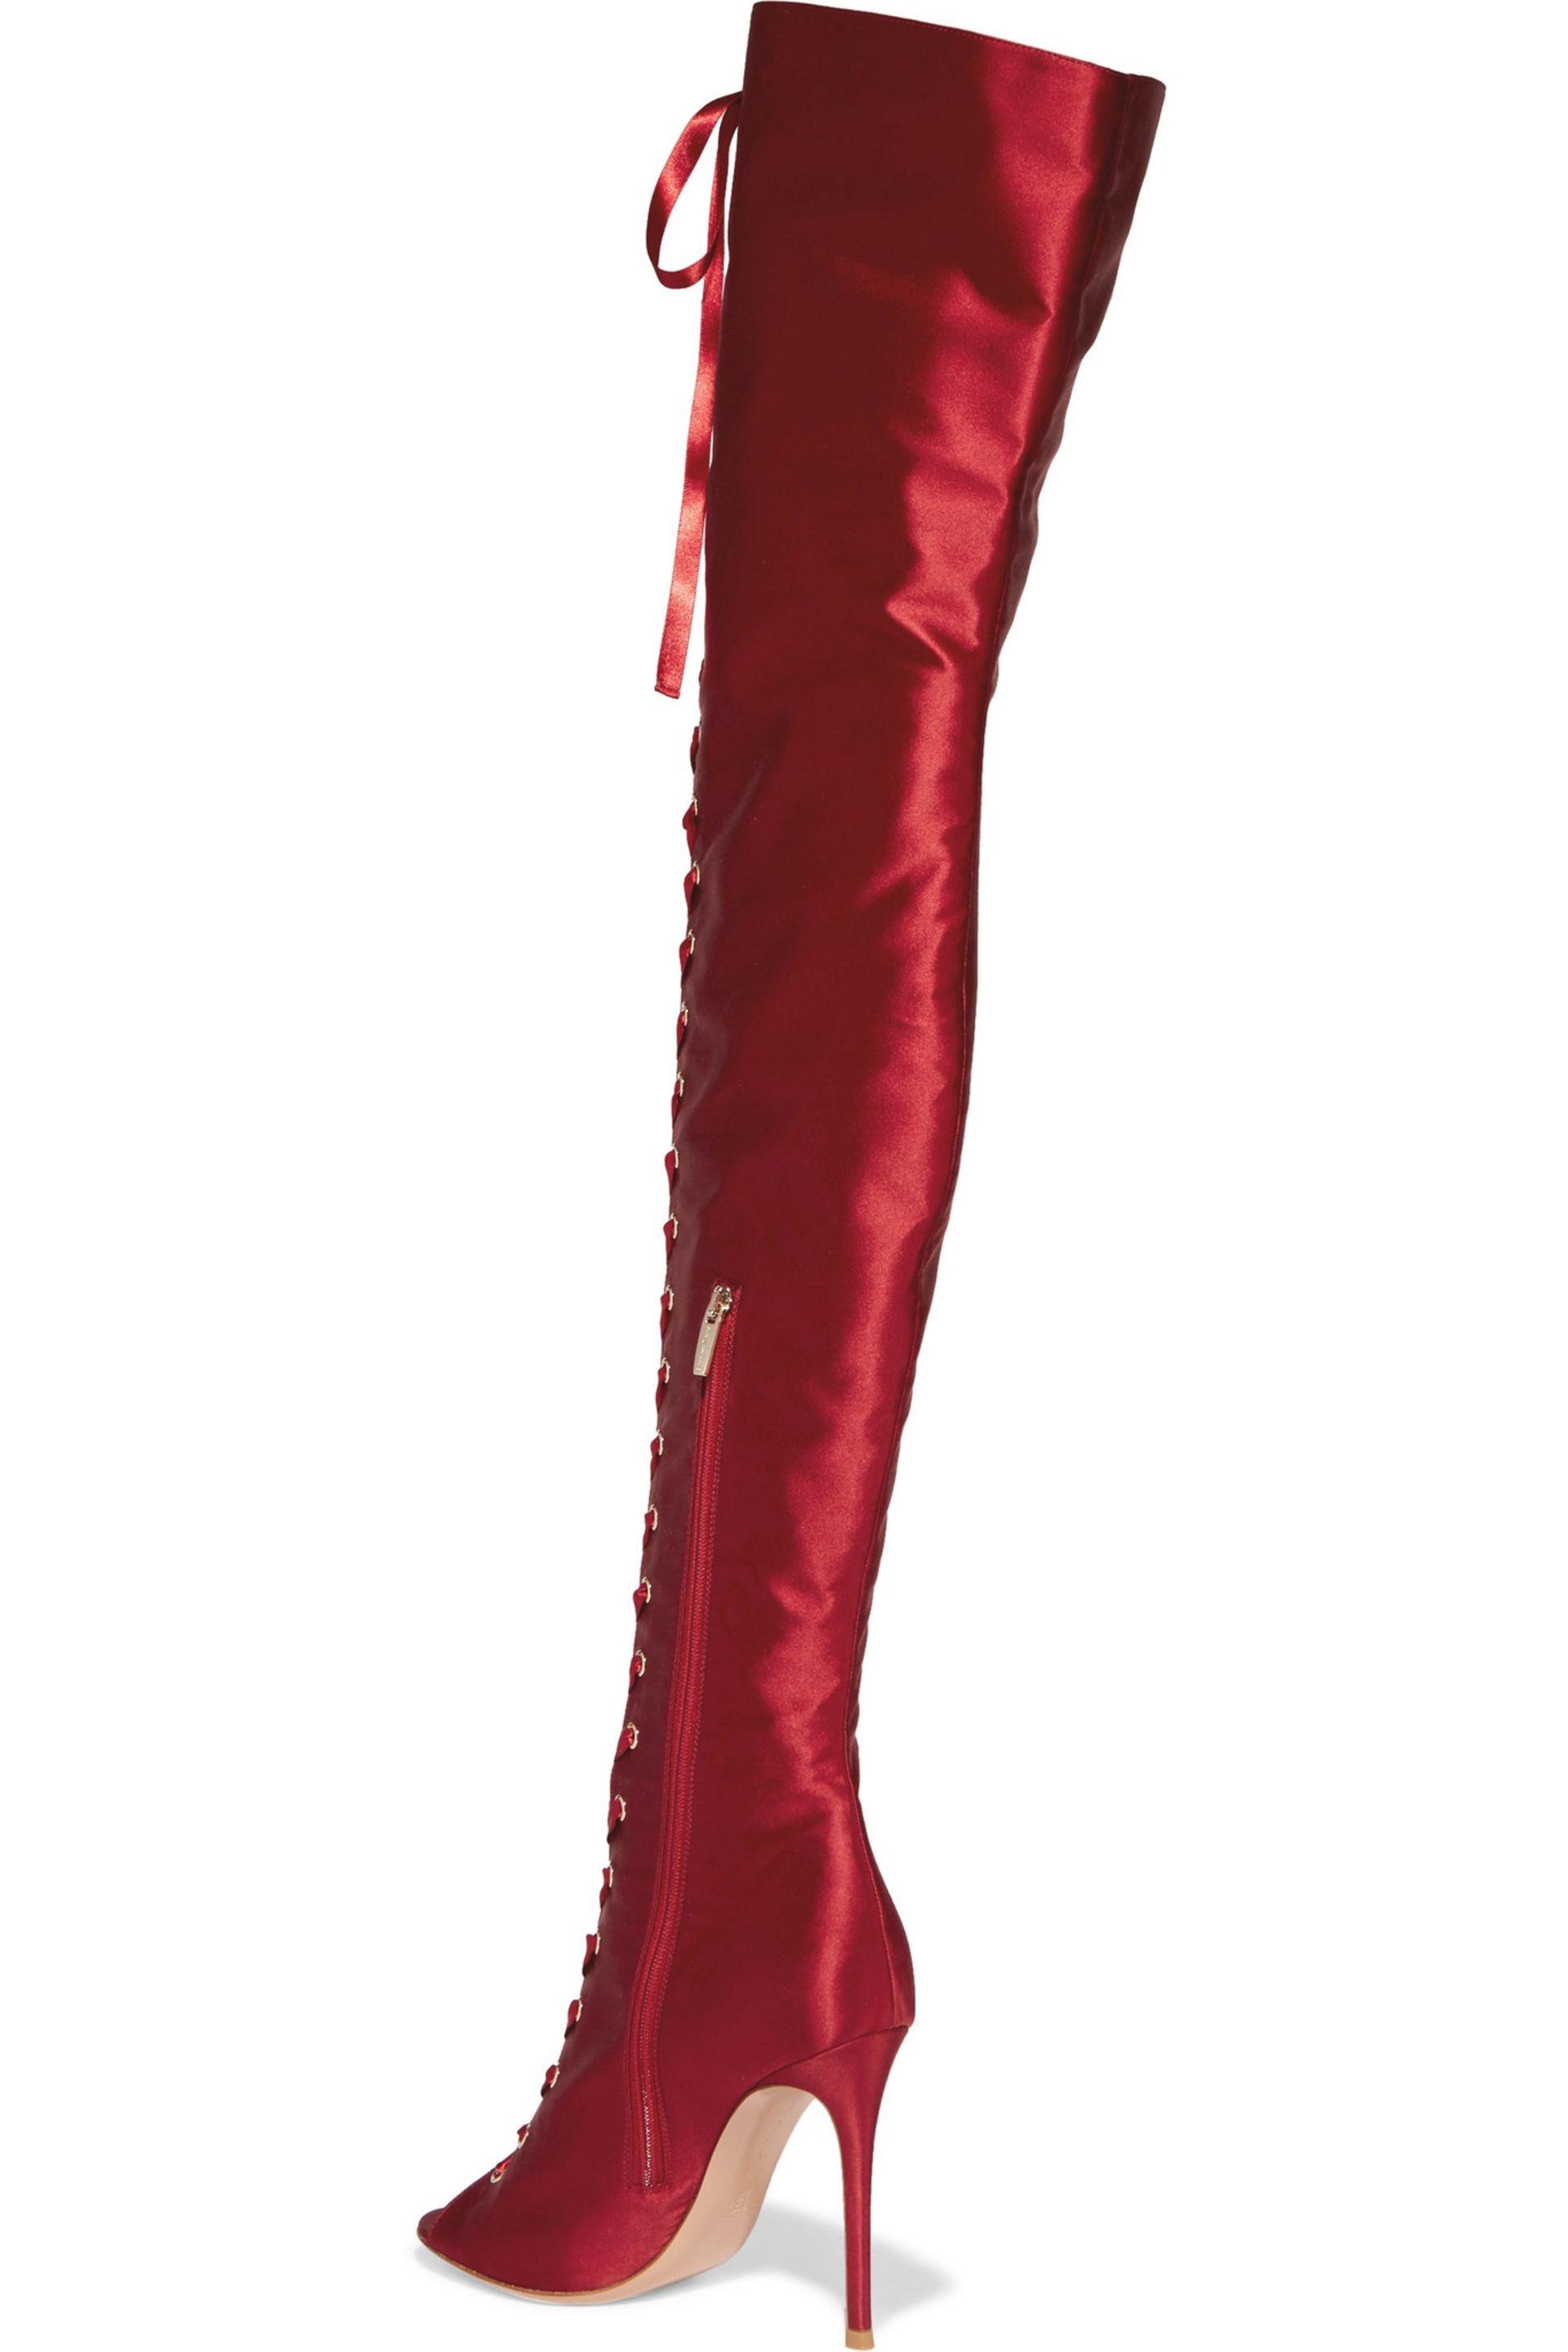 gianvito rossi red boots